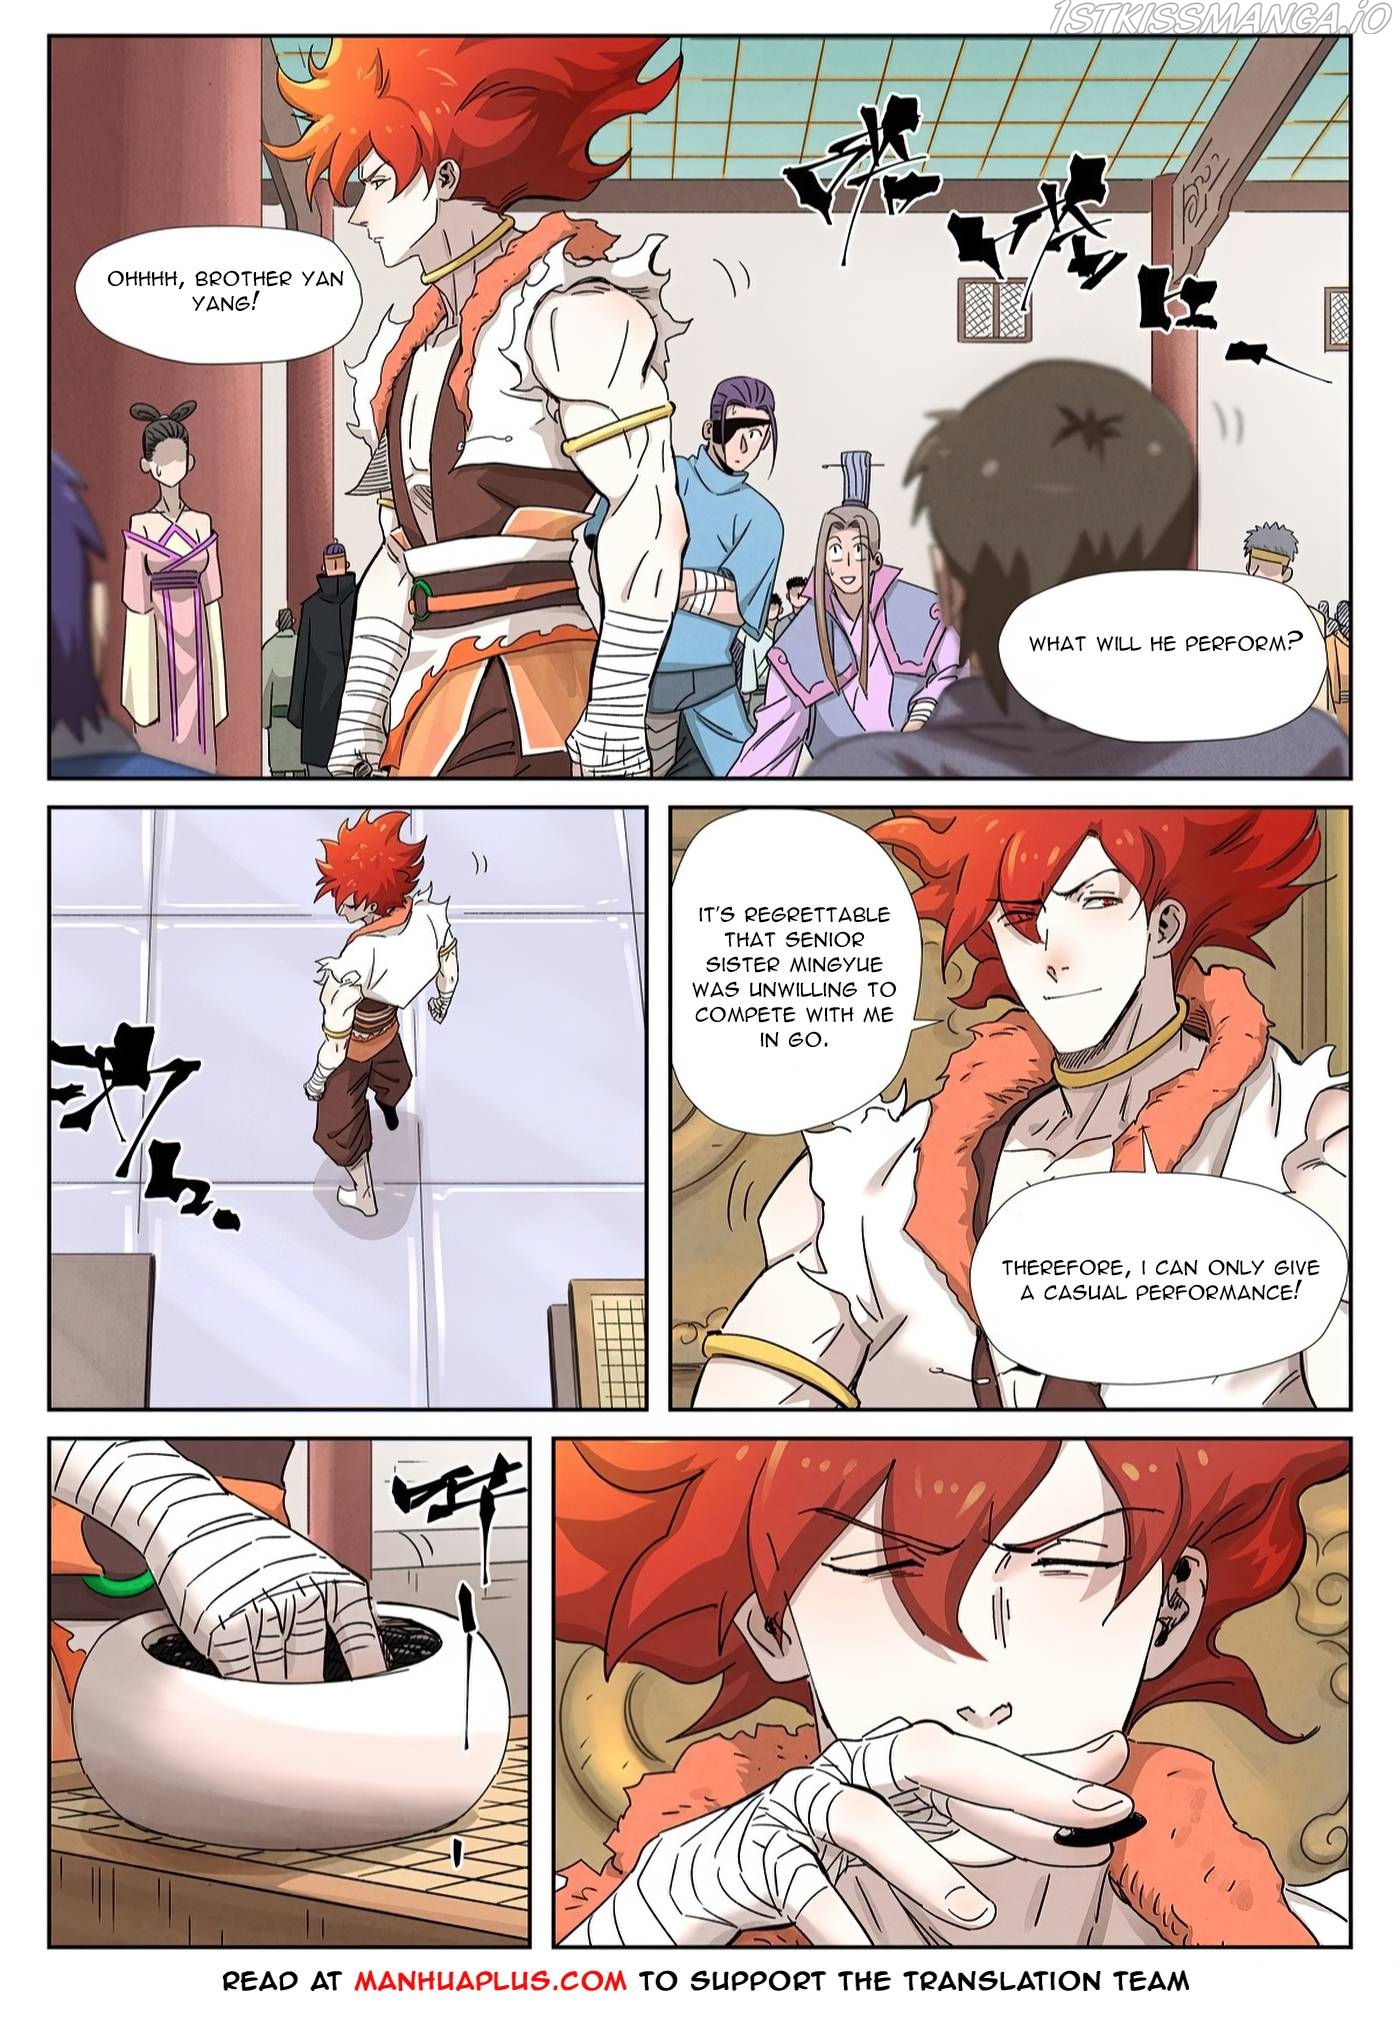 Tales of Demons and Gods Manhua Chapter 340.8 - Page 4